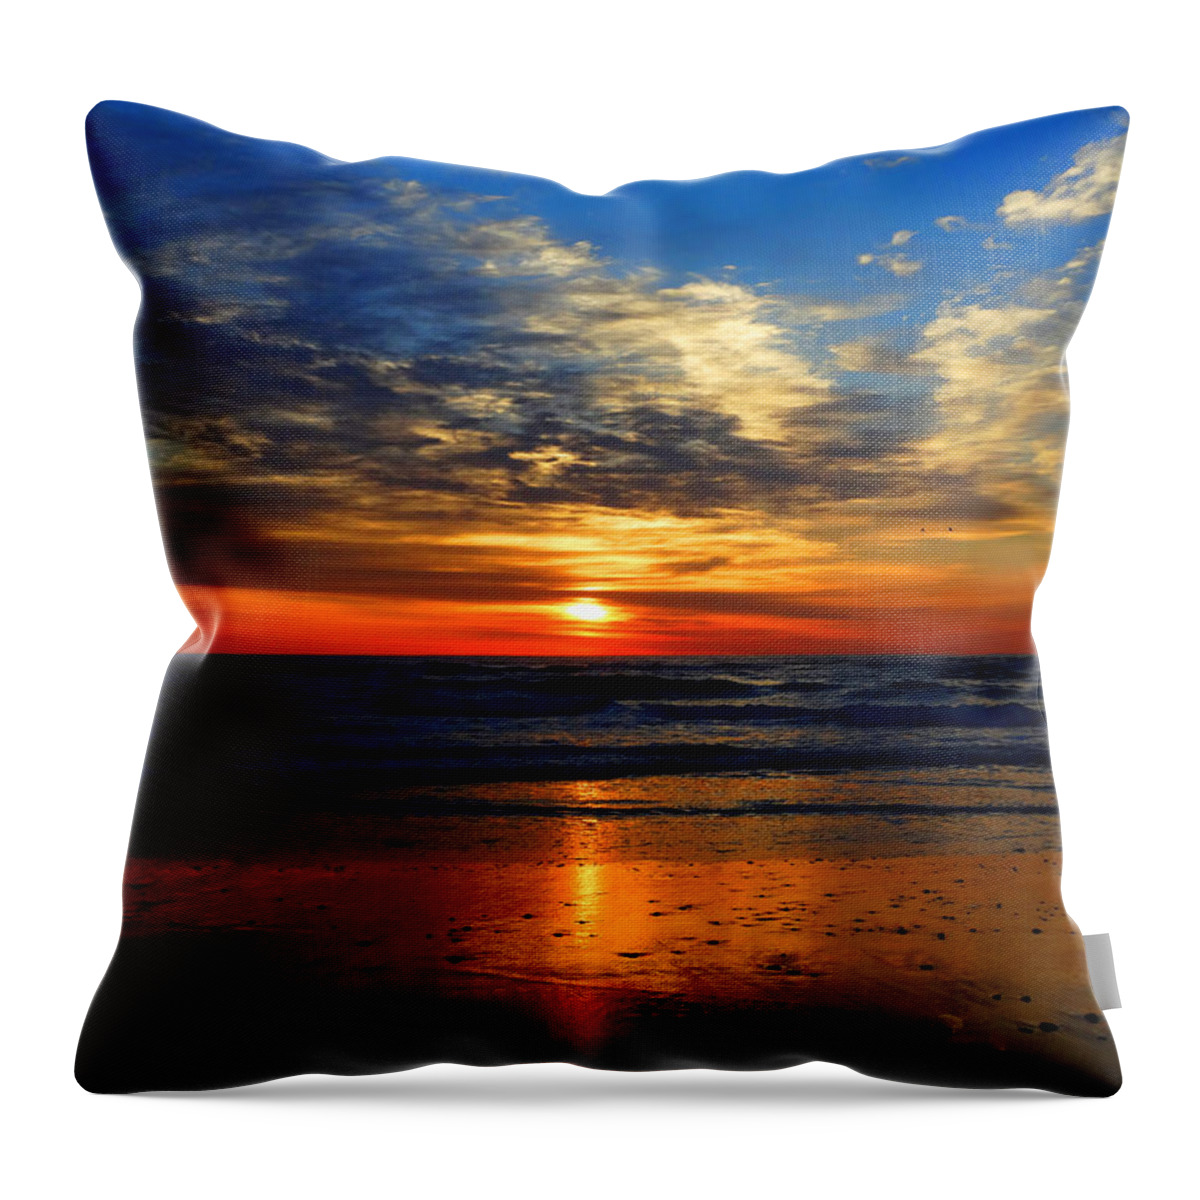 Ocean Throw Pillow featuring the photograph Electric Golden Ocean Sunrise by Dianne Cowen Cape Cod Photography